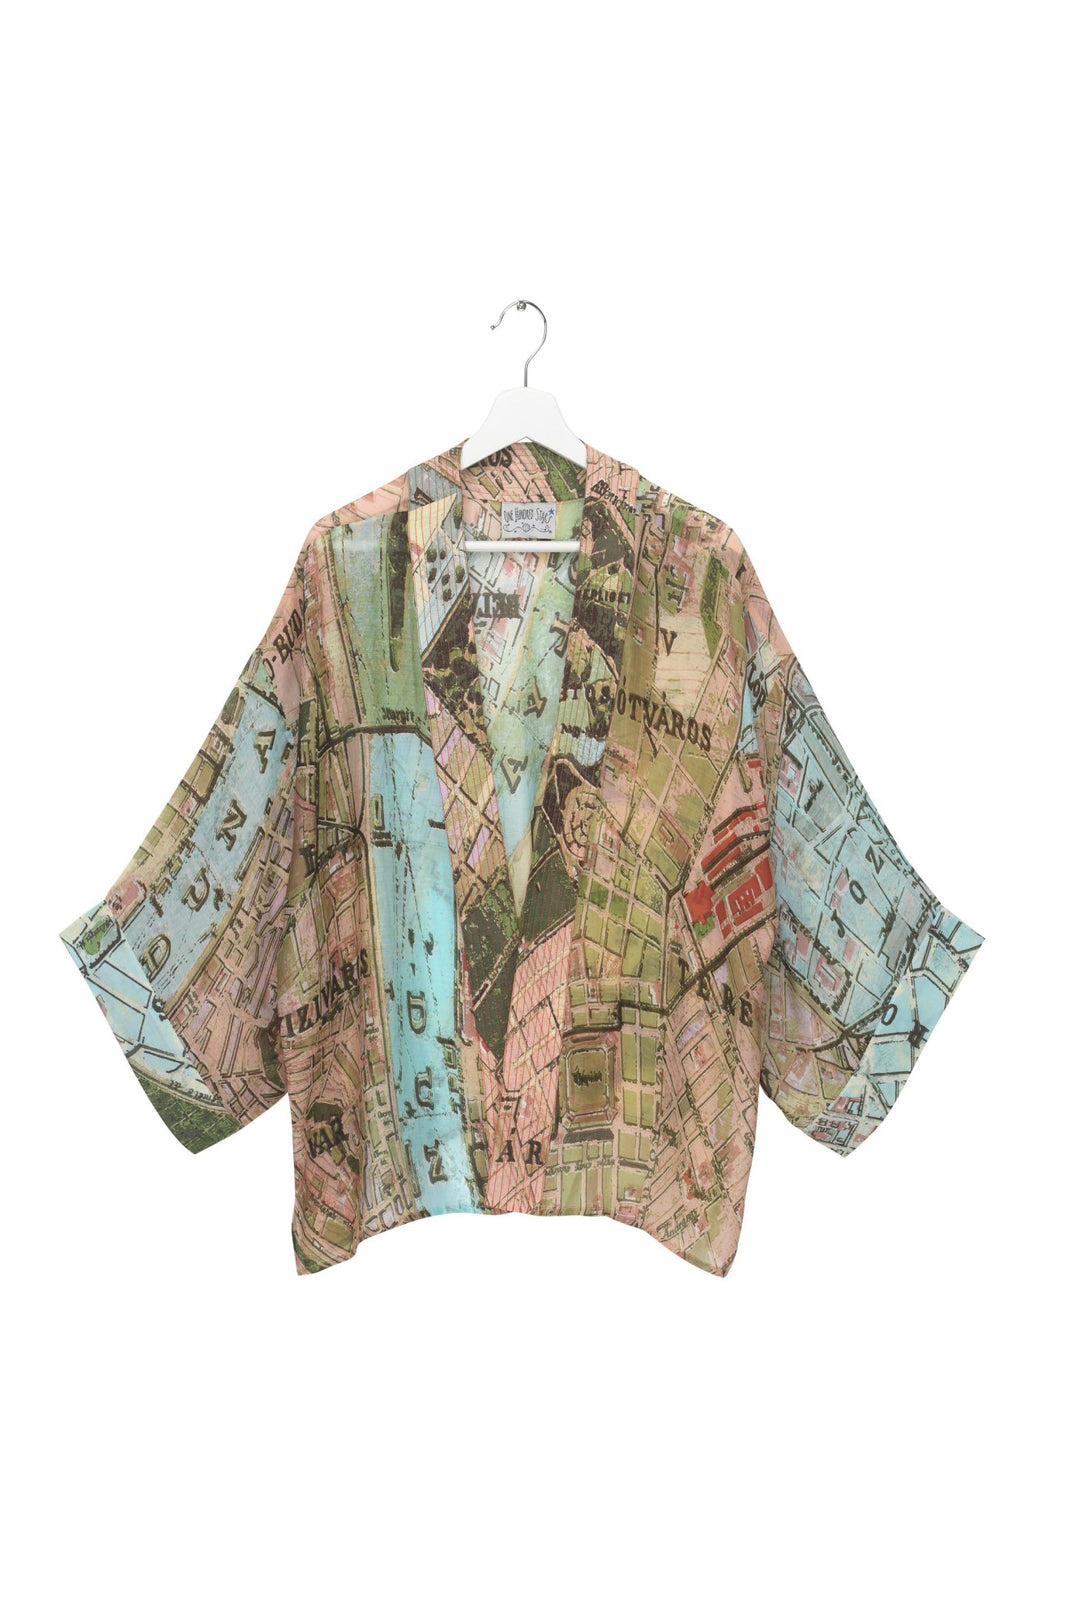 One Hundred Stars Budapest Map Kimono- Our bestselling kimono jackets have loose ¾ length sleeves, an open front and a lightly embroidered lapel. Pair with a matching camisole and your favourite jeans in summer or layer over a polo neck during the cooler months.